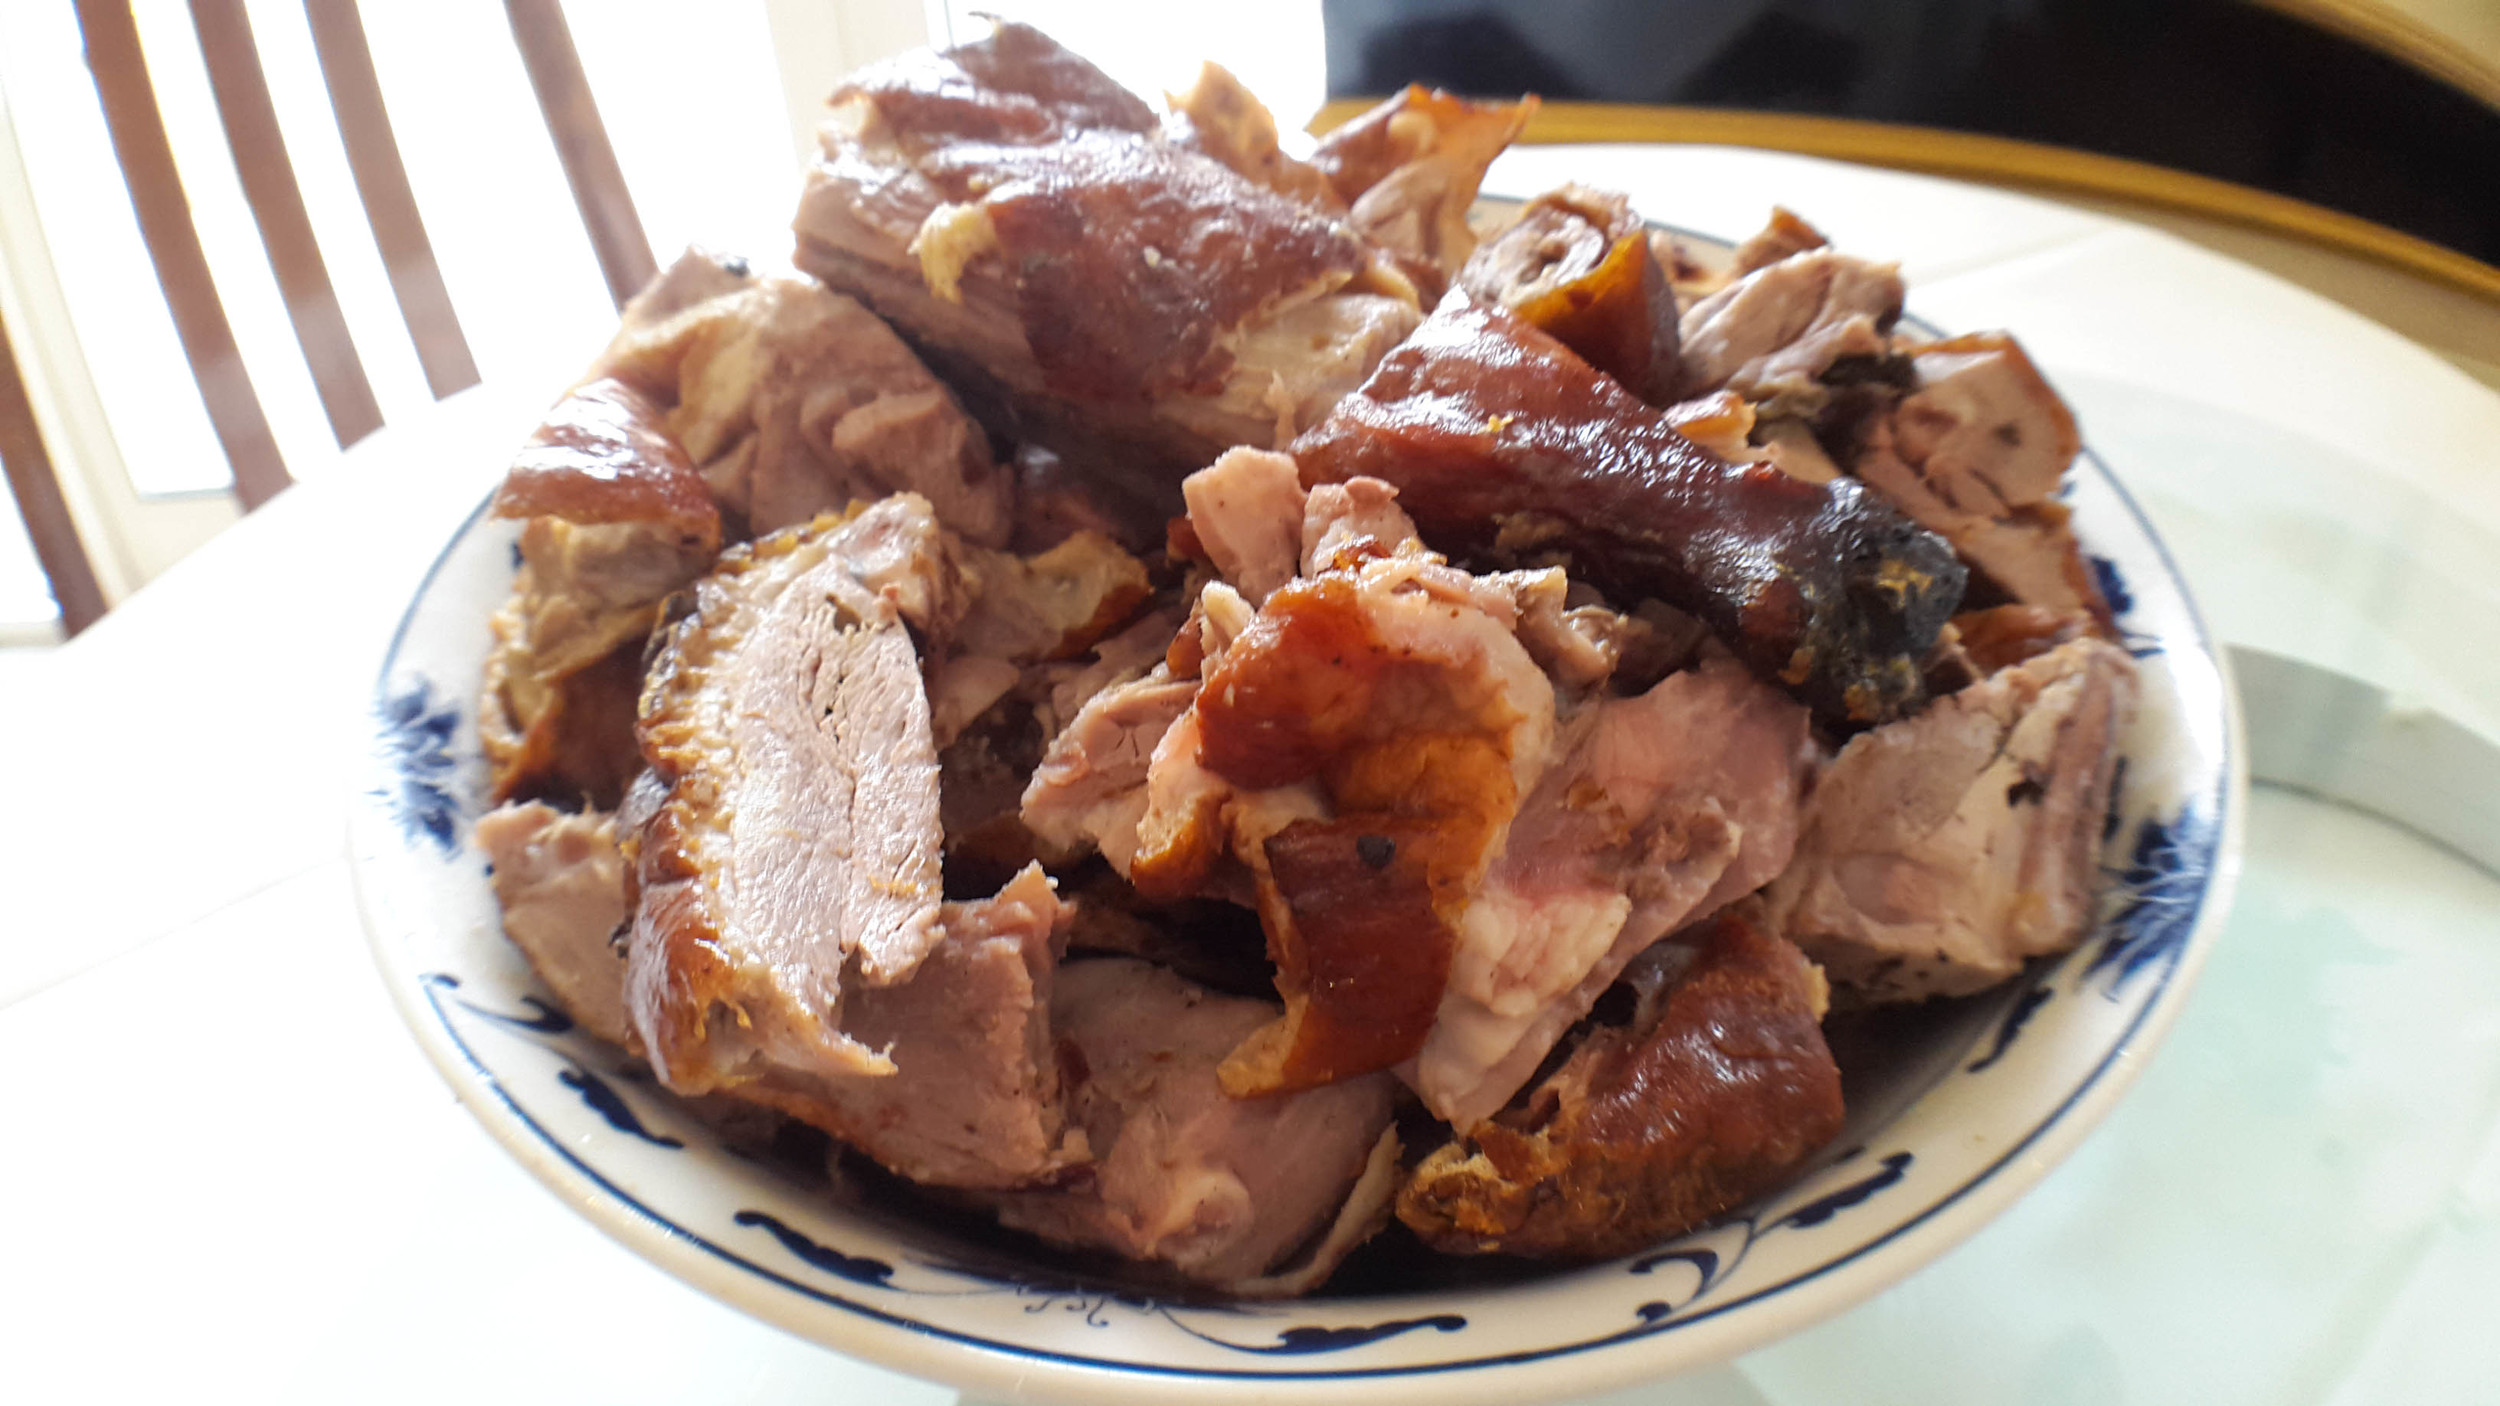  Half a Chinese Roast Duck. If you&nbsp;read my previous recipe, you'll find some recommendations of where to&nbsp;find the best roast duck in London. 